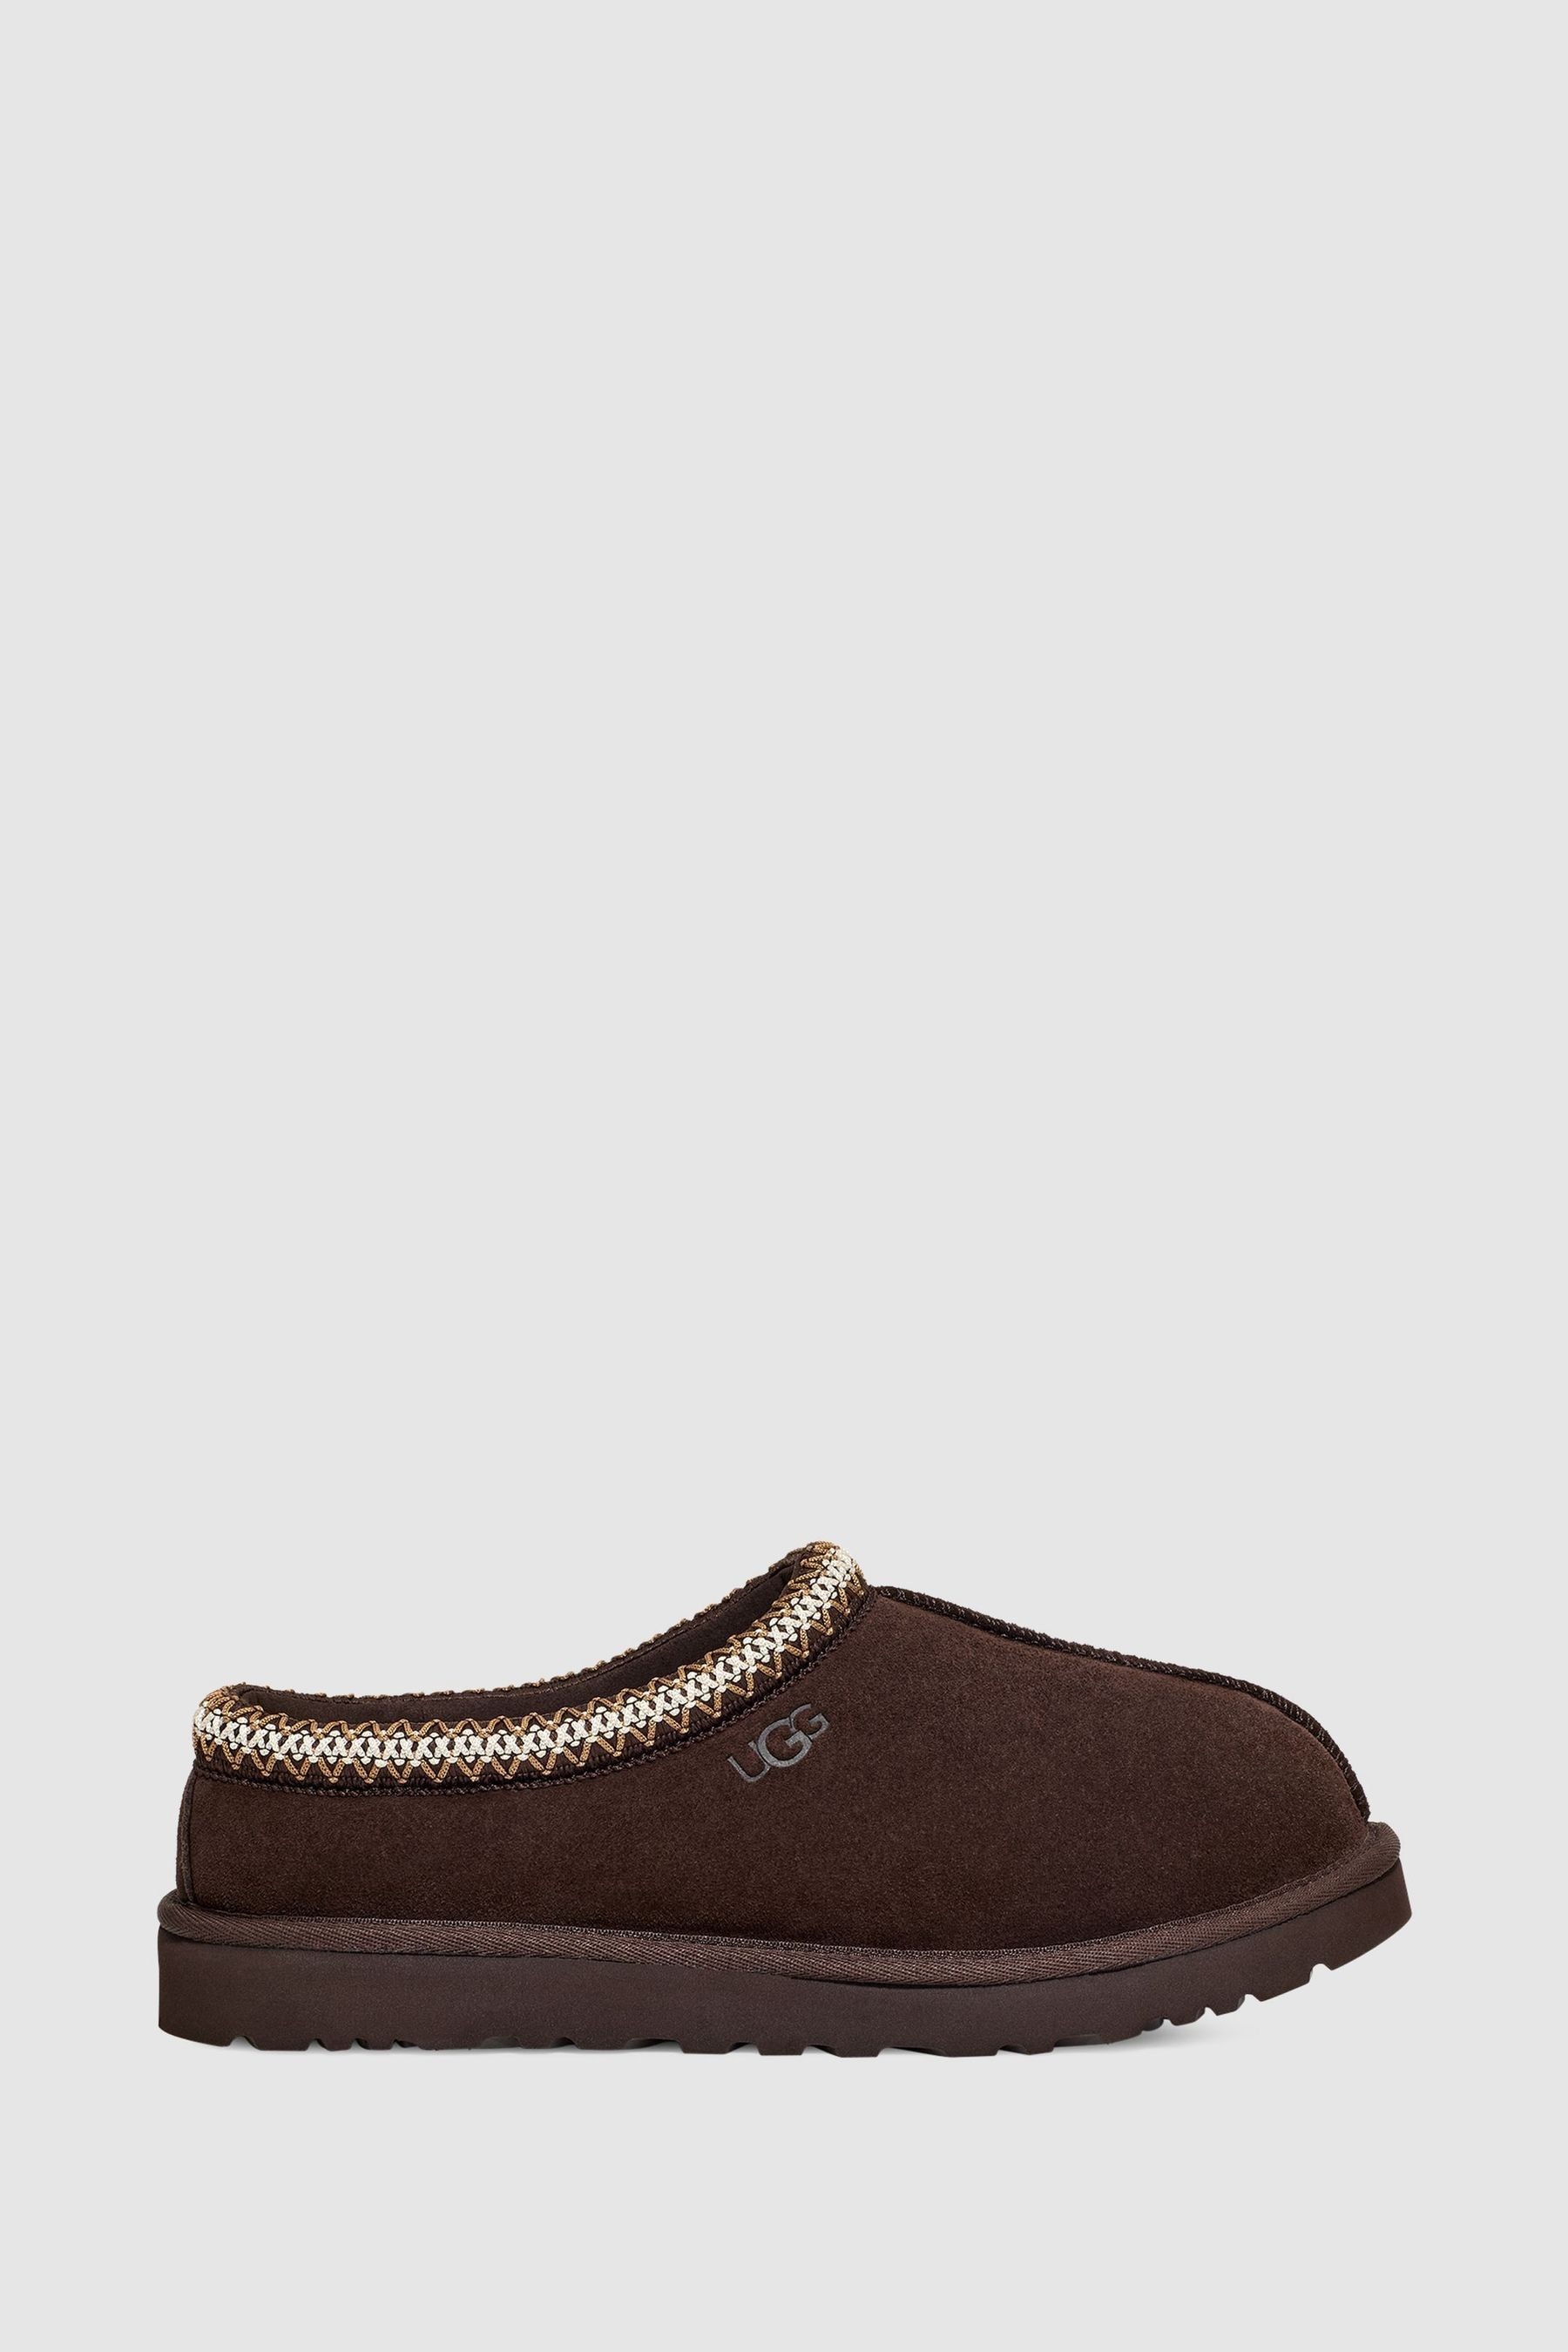 Shop Ugg Tasman Suede Slippers In Dusted Cocoa